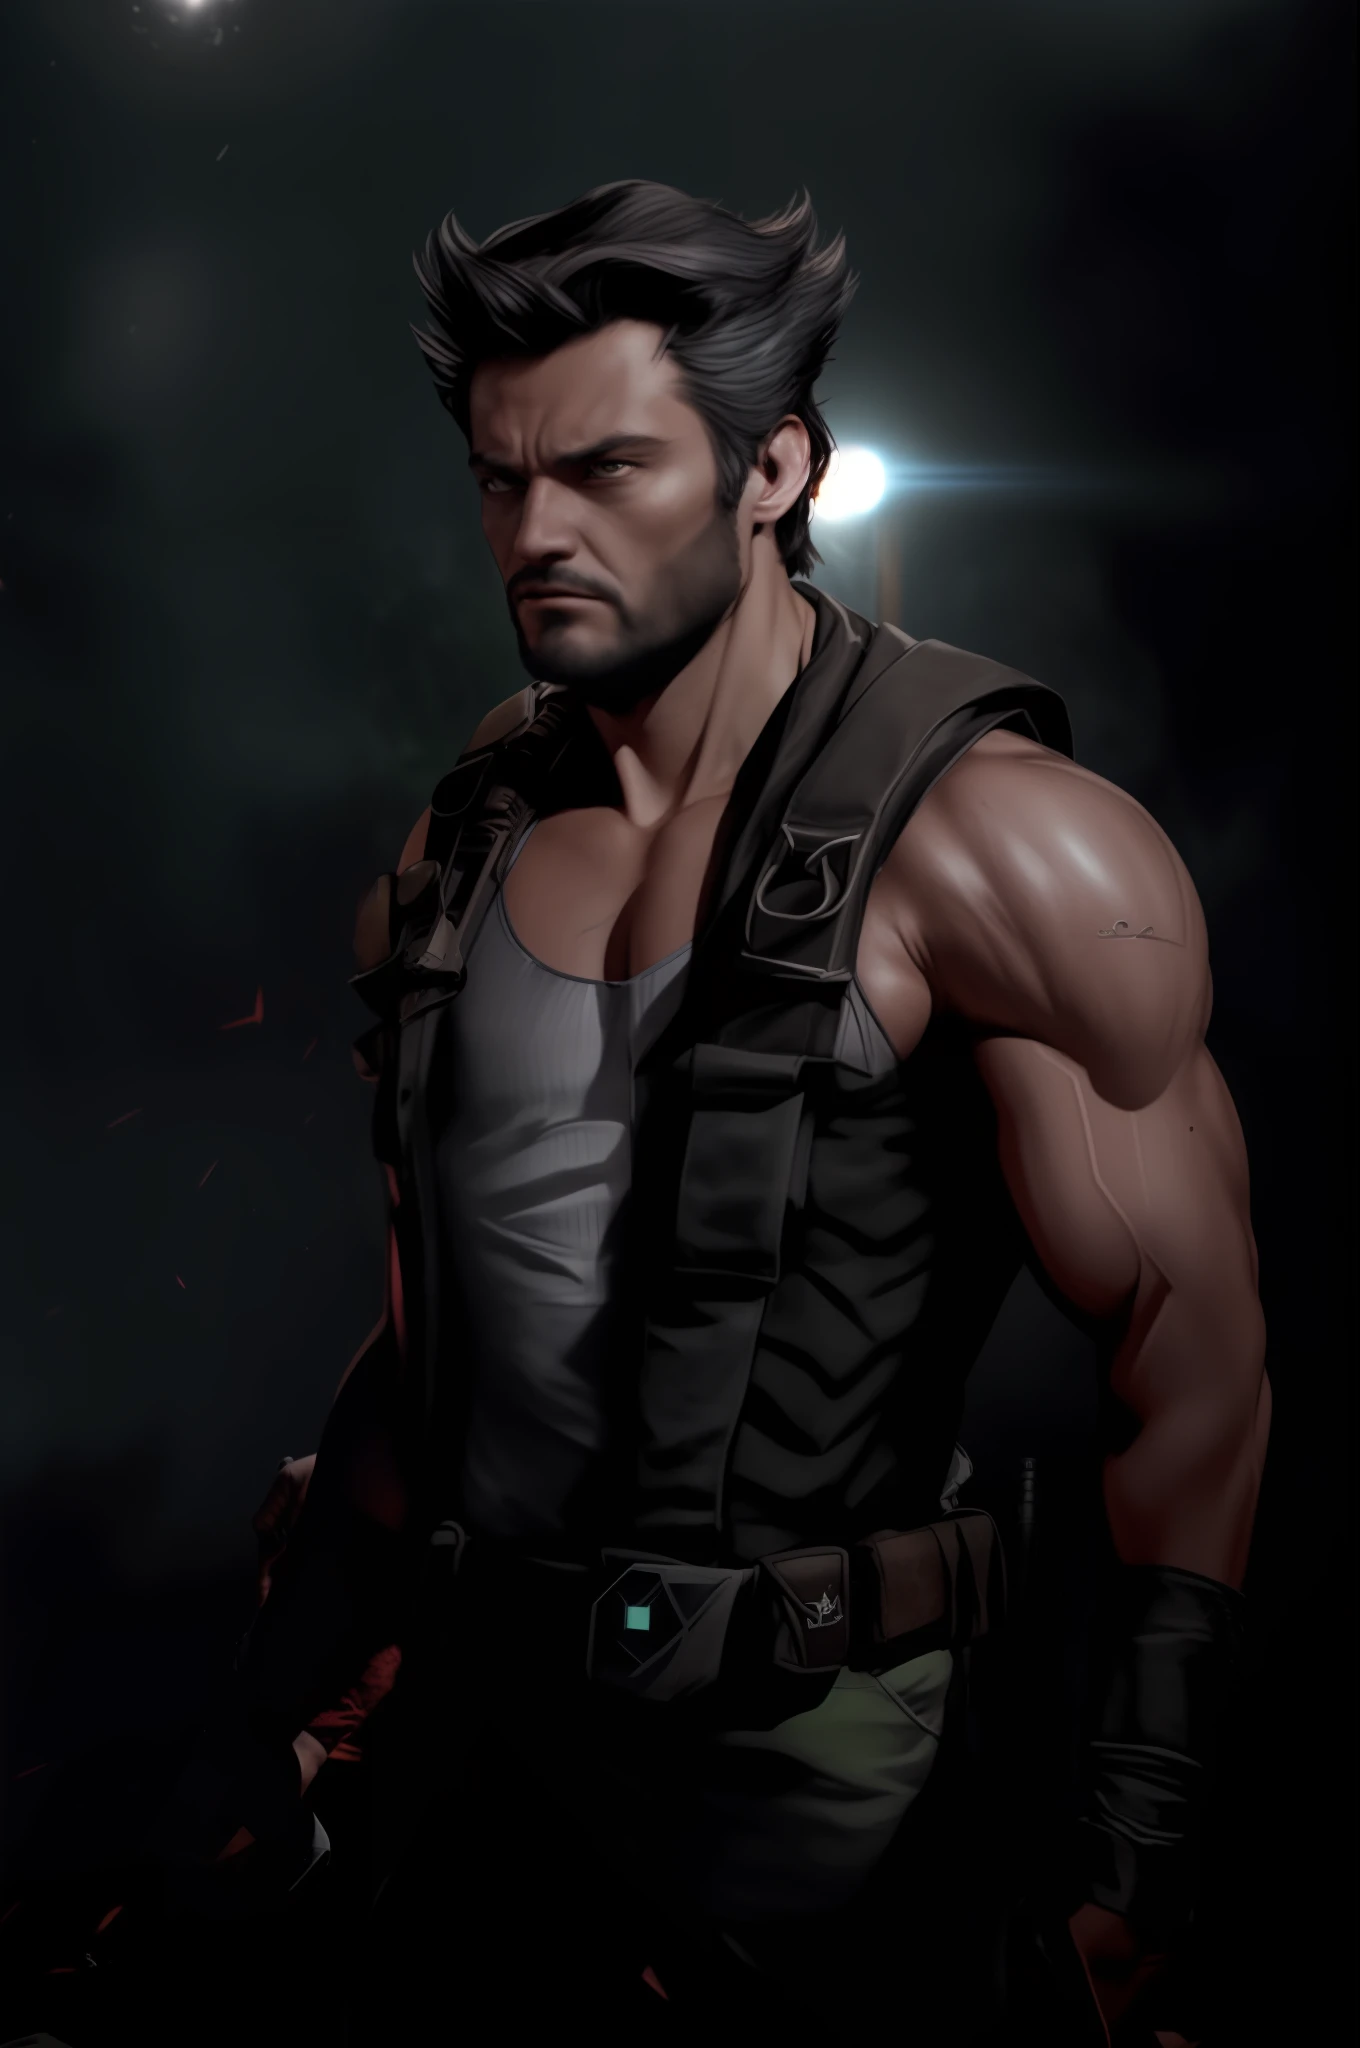 homem fitness, wolverine, Barba wolverine, marvel wolverine, man with wolverine claws,bodybuilder man, A city behind man, ((Chaotic combat scenario)), (((guerrilla))), lightning and thunder, lightnings, Fantastic, fancy,image ultra realistic, imagem HD, Full HD, Full definition, 真实感, Ultra realistic quality, fot,professional foto, 8K, cinematic lighthing, photographic, Eastman Kodak Color Negative film 5251 50T filmado em panavision super ps | | | | | . no arms, highy detailed, photorealistic portrait, Brilliant studio setting, natural lighting, Crisp quality and light reflections, unreal engine 5 quality render, lifelike face, natural body figure on instagram, full body shot shot, Spring Teleobjetiva, 50 millimeters,
Portrait of Indian village woman at a gathering in the forests of Himachal Pradesh, cinemactic, Photo Session, Shot on 25mm lens, Depth of field, Tilt Blur, shutter-speed 1/1000, F/22, White balance, 32k, Super-Resolution, By Photo RGB, half rear lighting, contra-luz, dramatic lighting, Incandescent, soft lighting, volumetric, Tale Day, global ilumination, Global Screen Space Illumination, Scattering, eyeshadows,  RISTY, twinkling, Lumen reflexes, screen space reflections, diffraction classification, chromatic aberration, GB Offset, Sweep Lines, ambient occlusion, antialiasing, FKAA, TXAA, RTX, SSAO, OpenGL Shaders, Post-processing, post - production, cell-shading, Tone-mapping, .....cgi, VFX, SFX, Insanely detailed and intricate, Hyper maximalist, chic, dinamic pose, fot, volumetric, ultra detali, details Intricate, super verbose, environment –uplight –v 4 –q 2